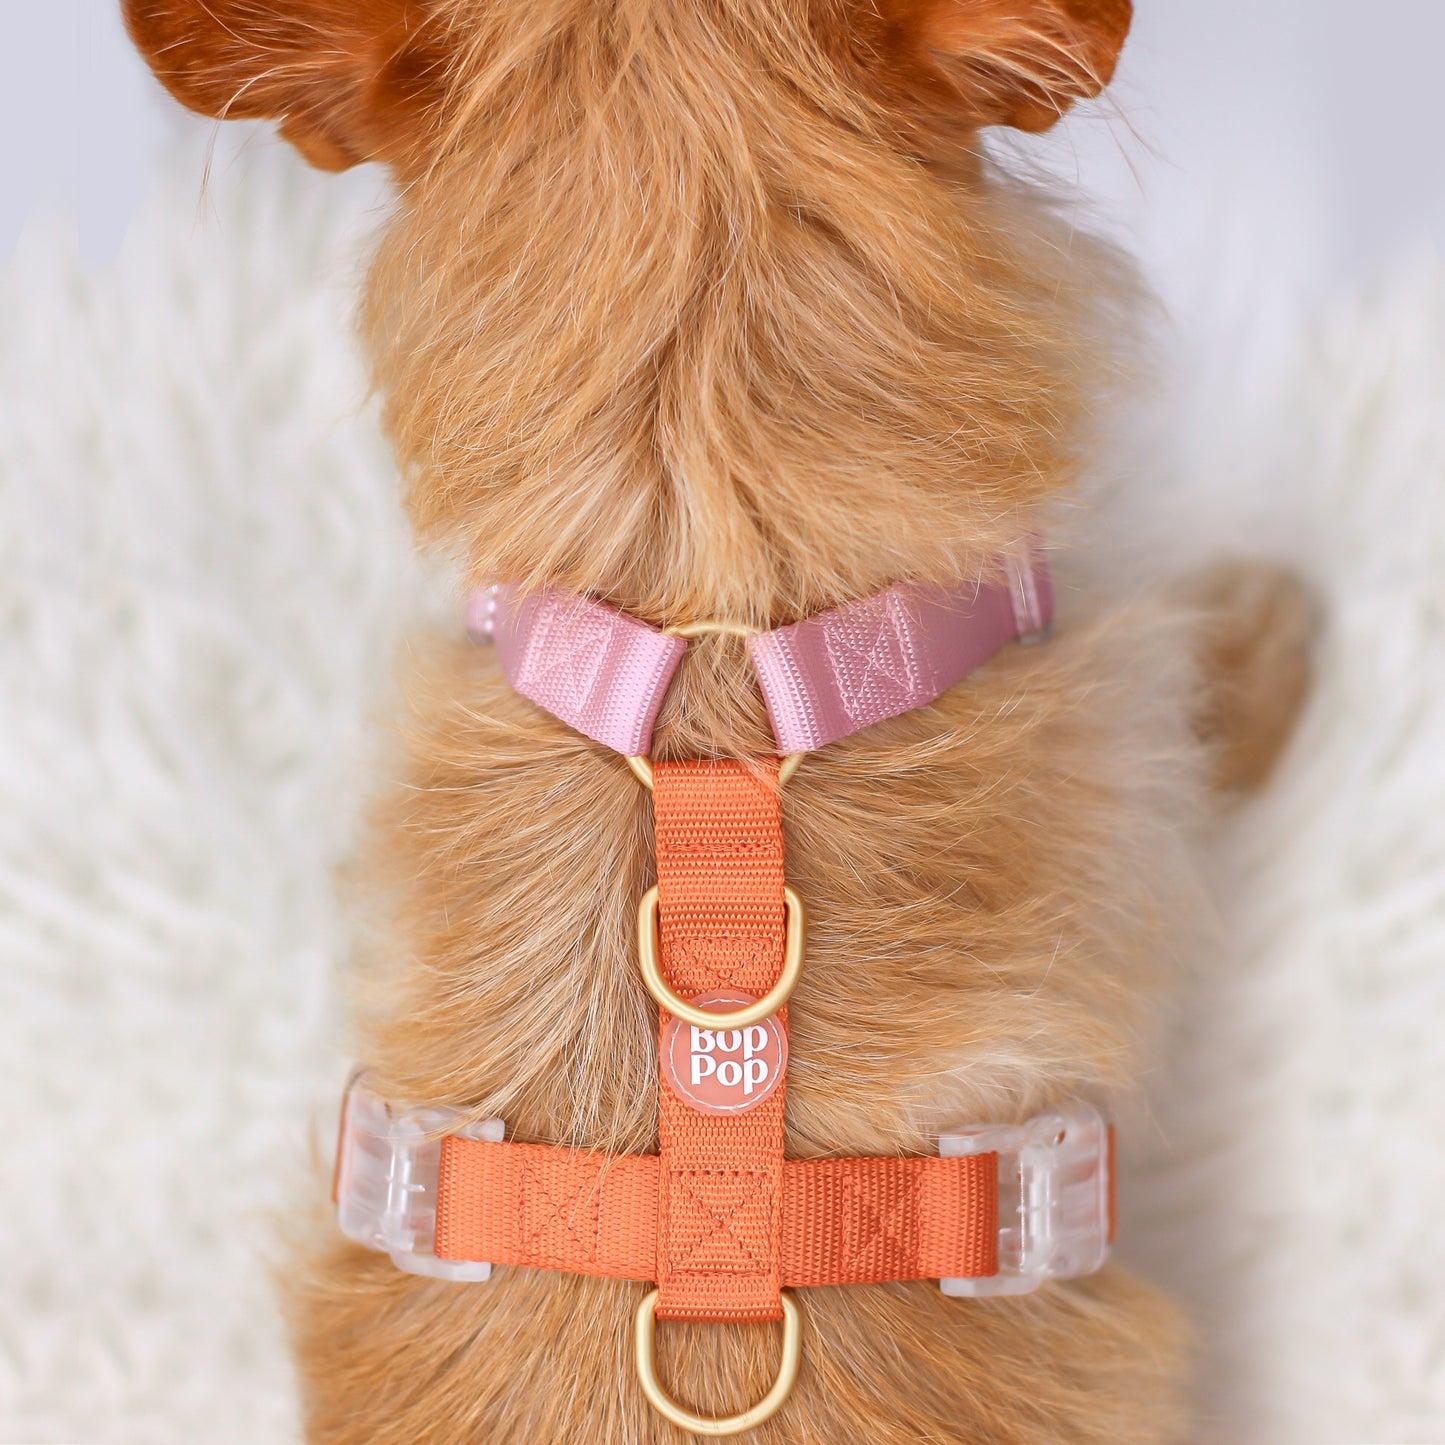 2 Color Dual Dusty Pink Orange Classic Dog Nylon Strap Harness with Gold Hardware Clear Buckles Pet Accessory Bop Pop Pets Details Logo tag